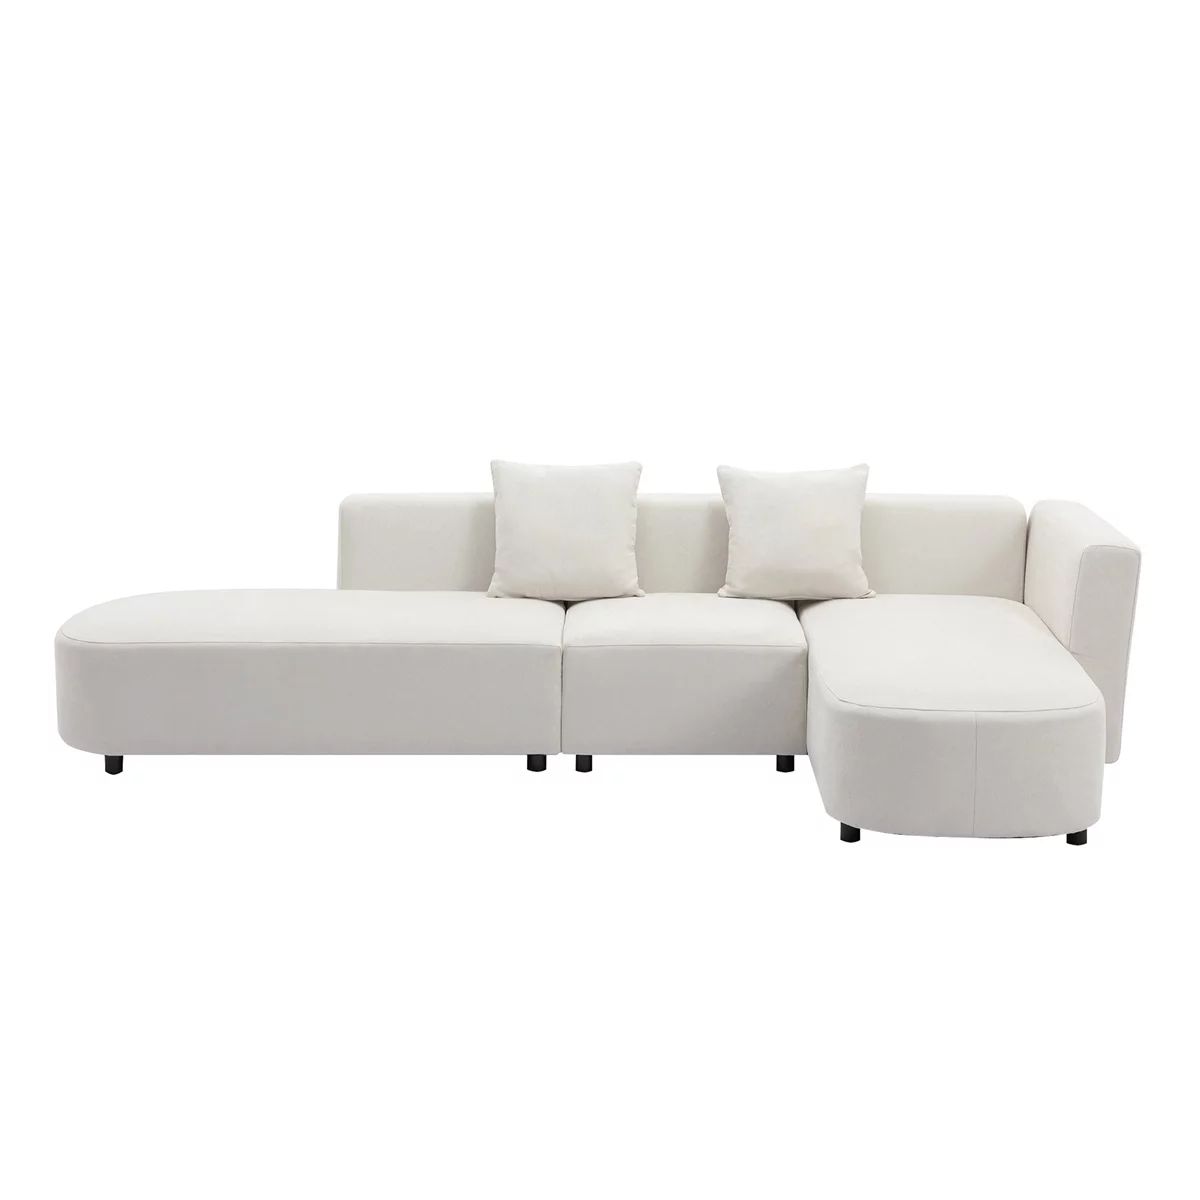 Upholstery Curved Sofa, Luxury L-Shaped Large Sofa Couch with Tufted Back, Right Hand Facing Sofa... | Walmart (US)